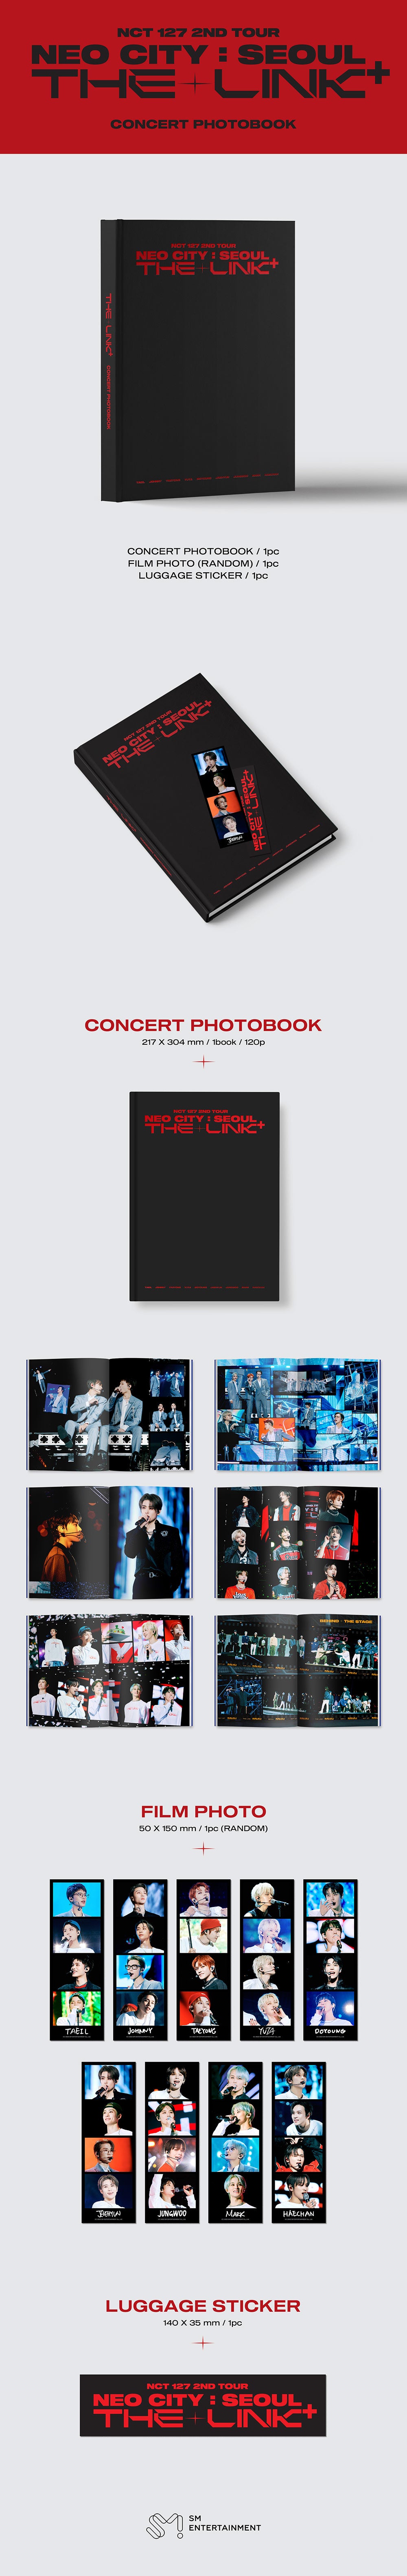 NCT 127 - 2ND TOUR [NEO CITY SEOUL - THE LINK] CONCERT PHOTO BOOK